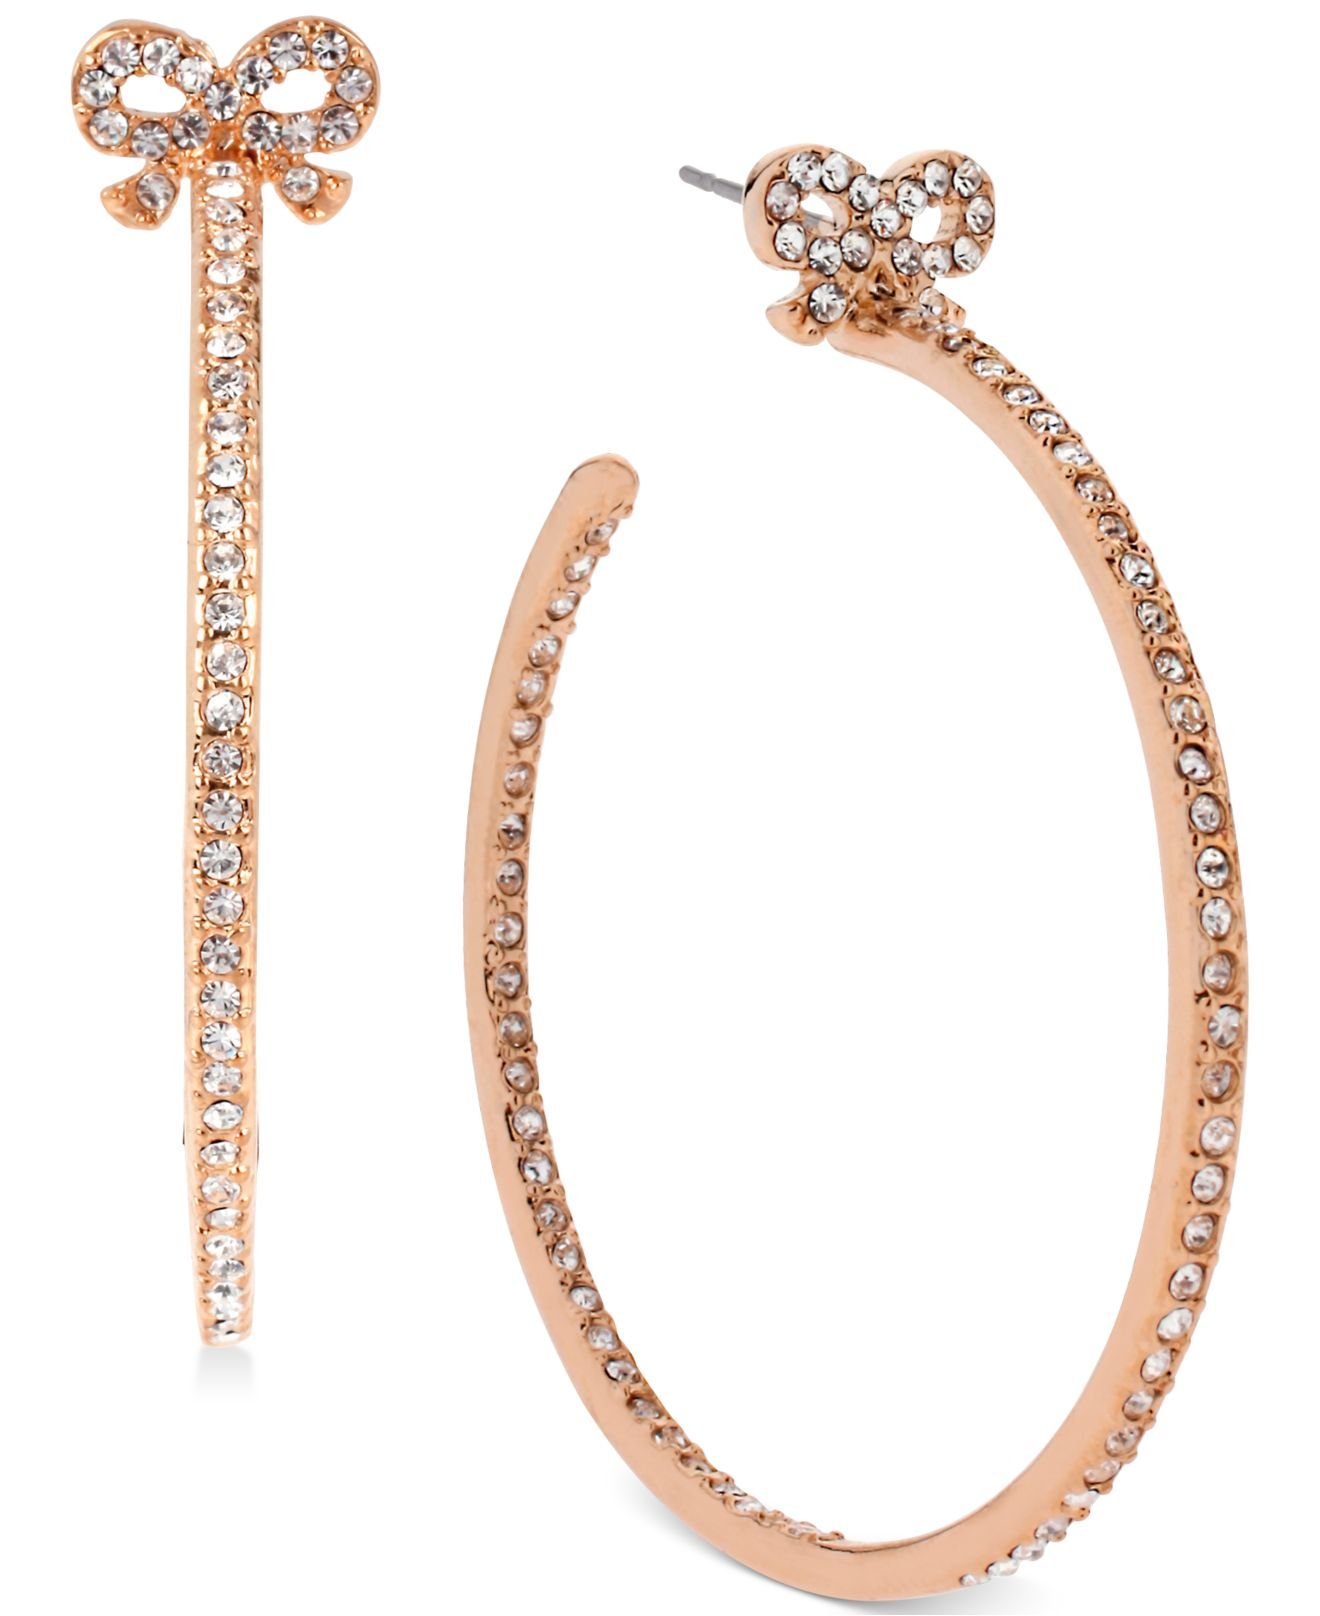 Betsey Johnson Rose Gold Rose Gold Tone Crystal Bow Hoop Earrings Pink Product 0 856504085 Normal 